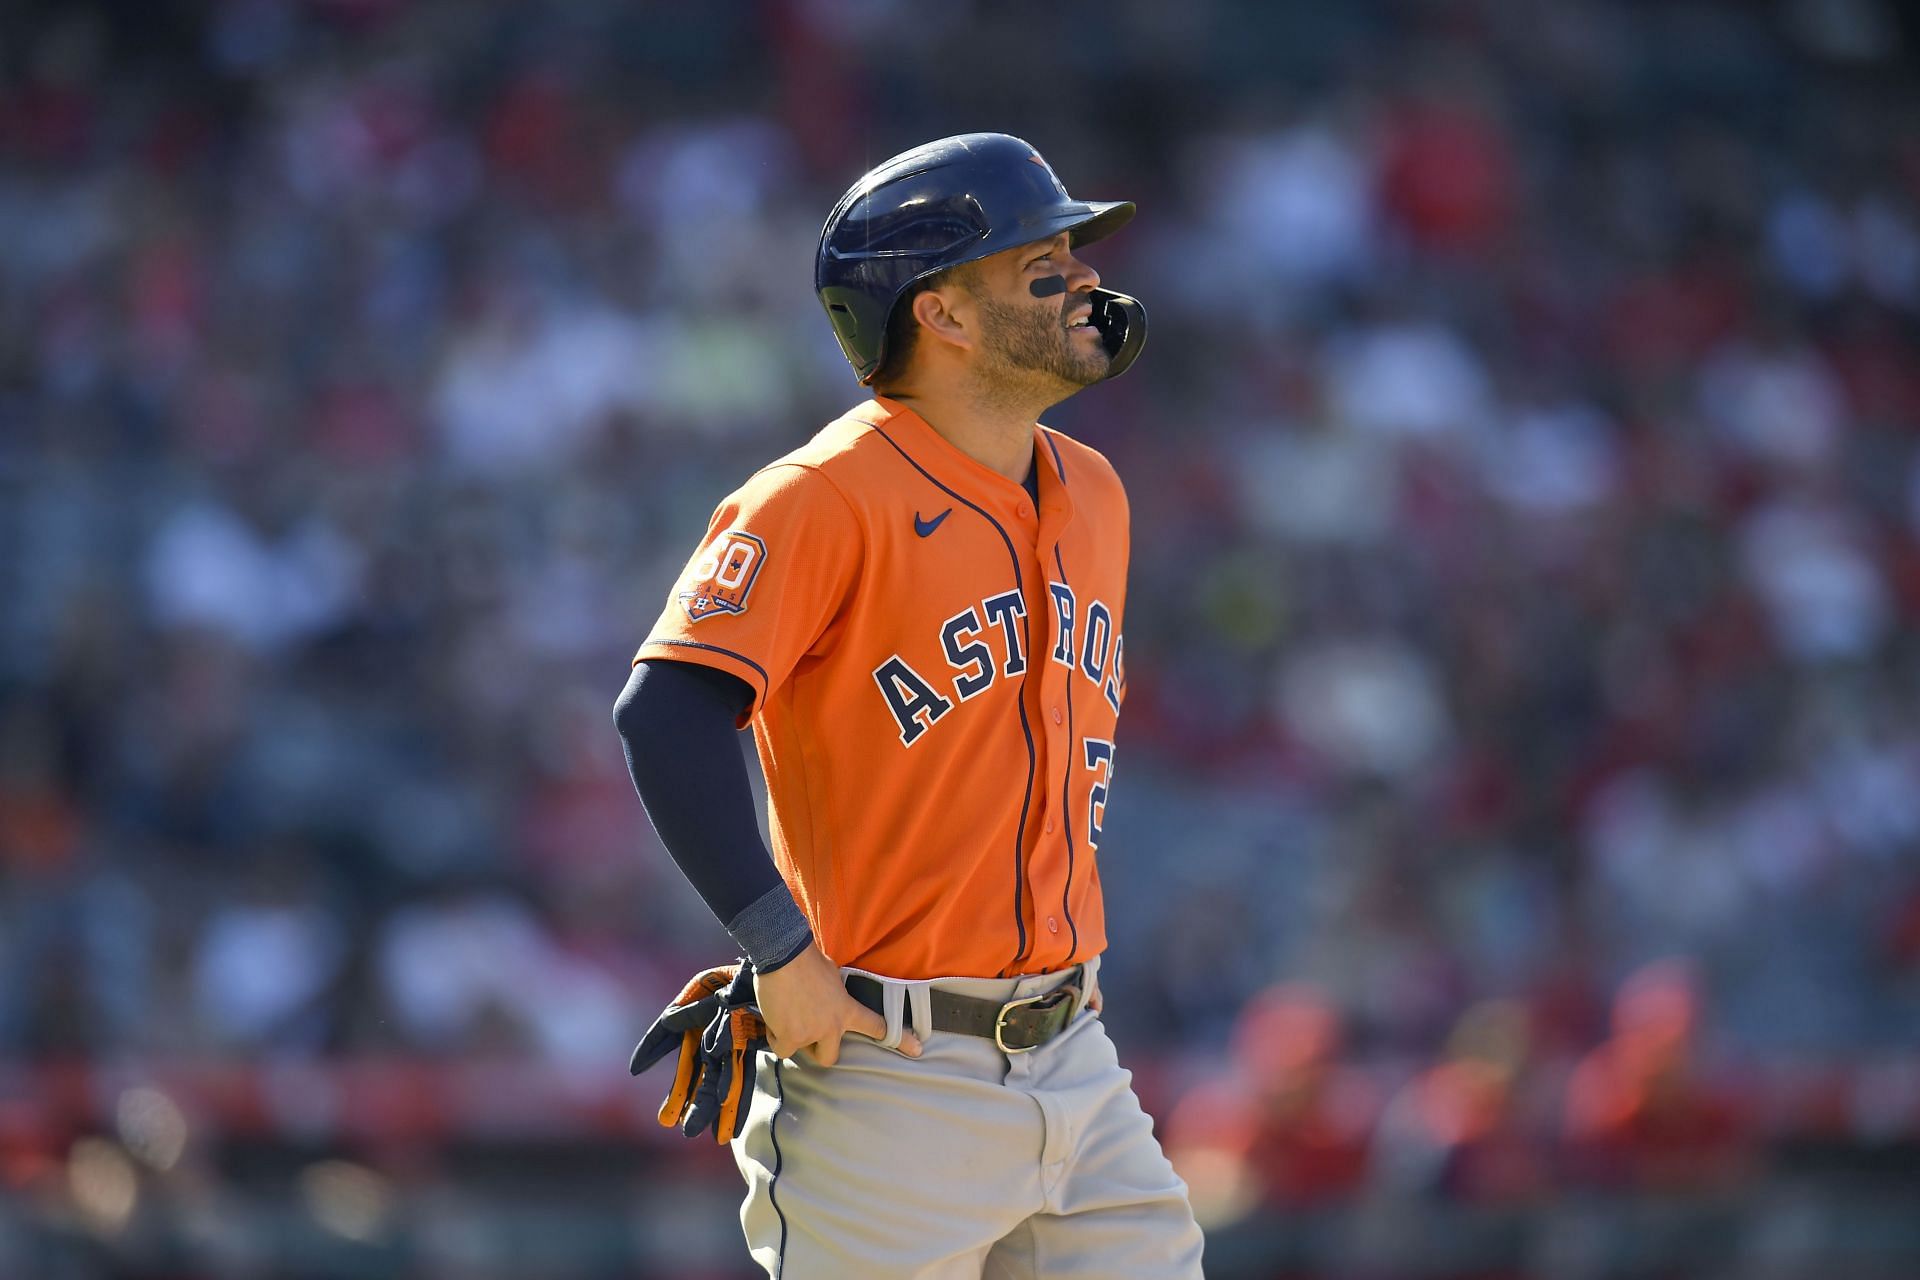 Jose Altuve looks on during a Houston Astros v Los Angeles Angels game earlier this season.